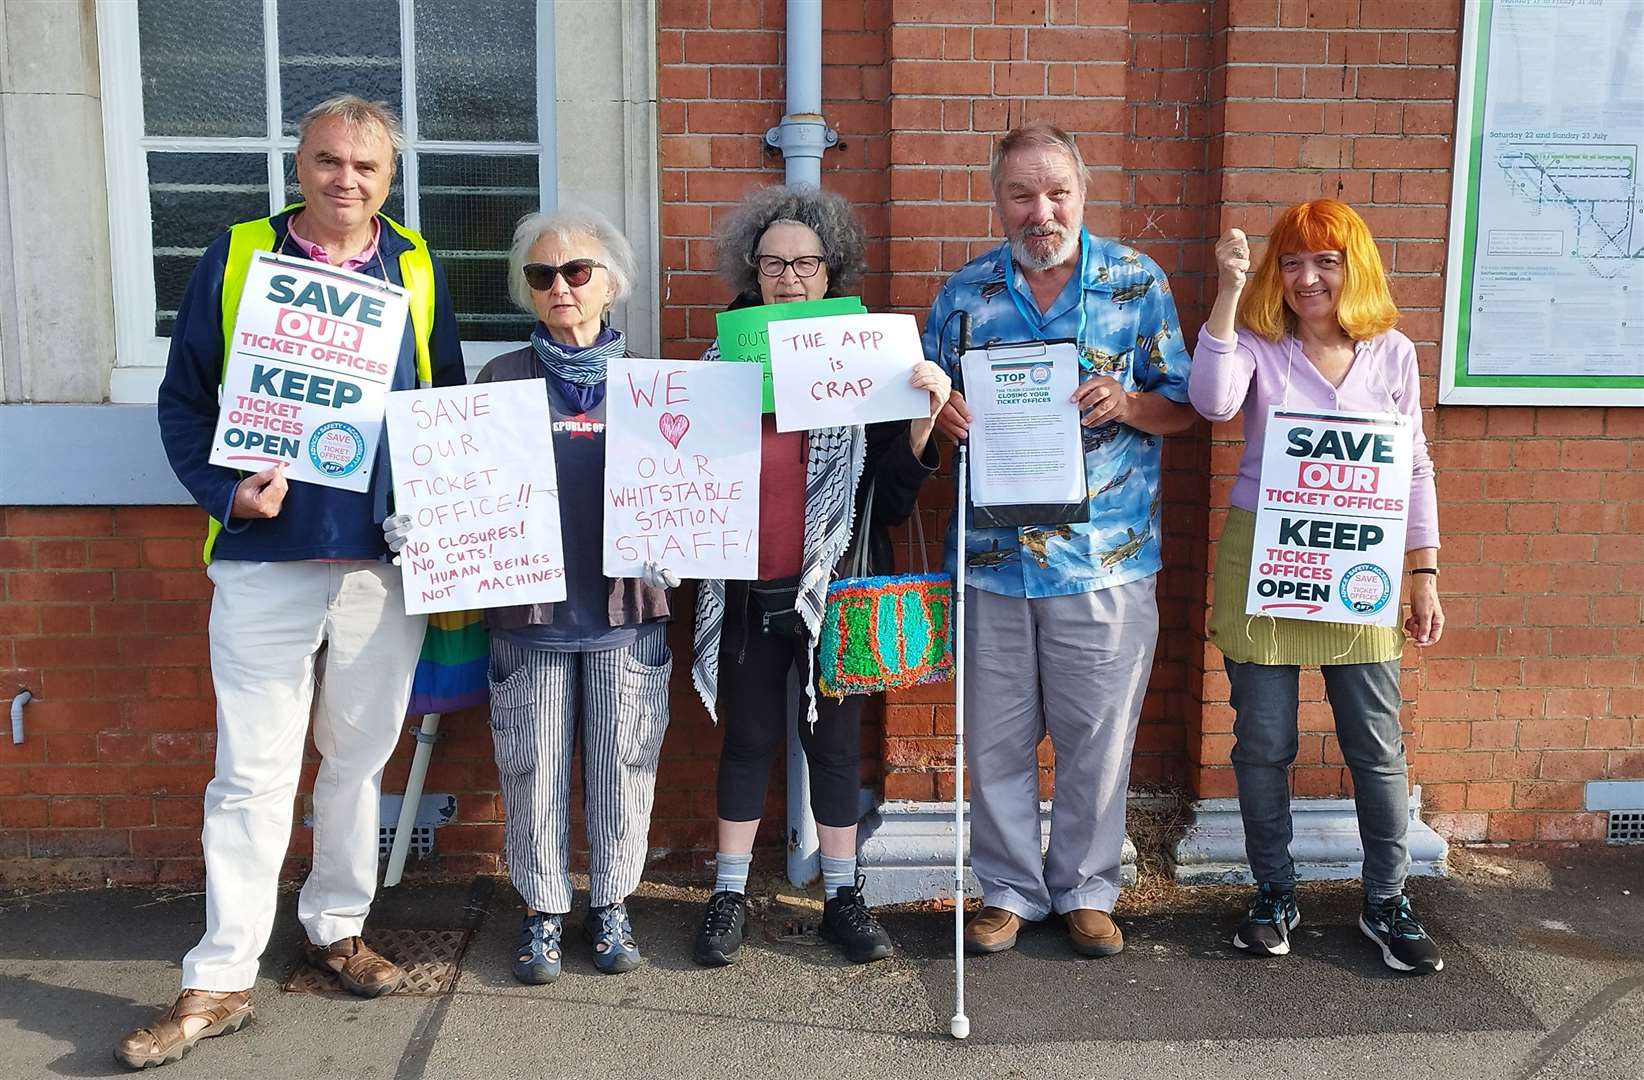 A protest against ticket office closures at Whitstable station this week